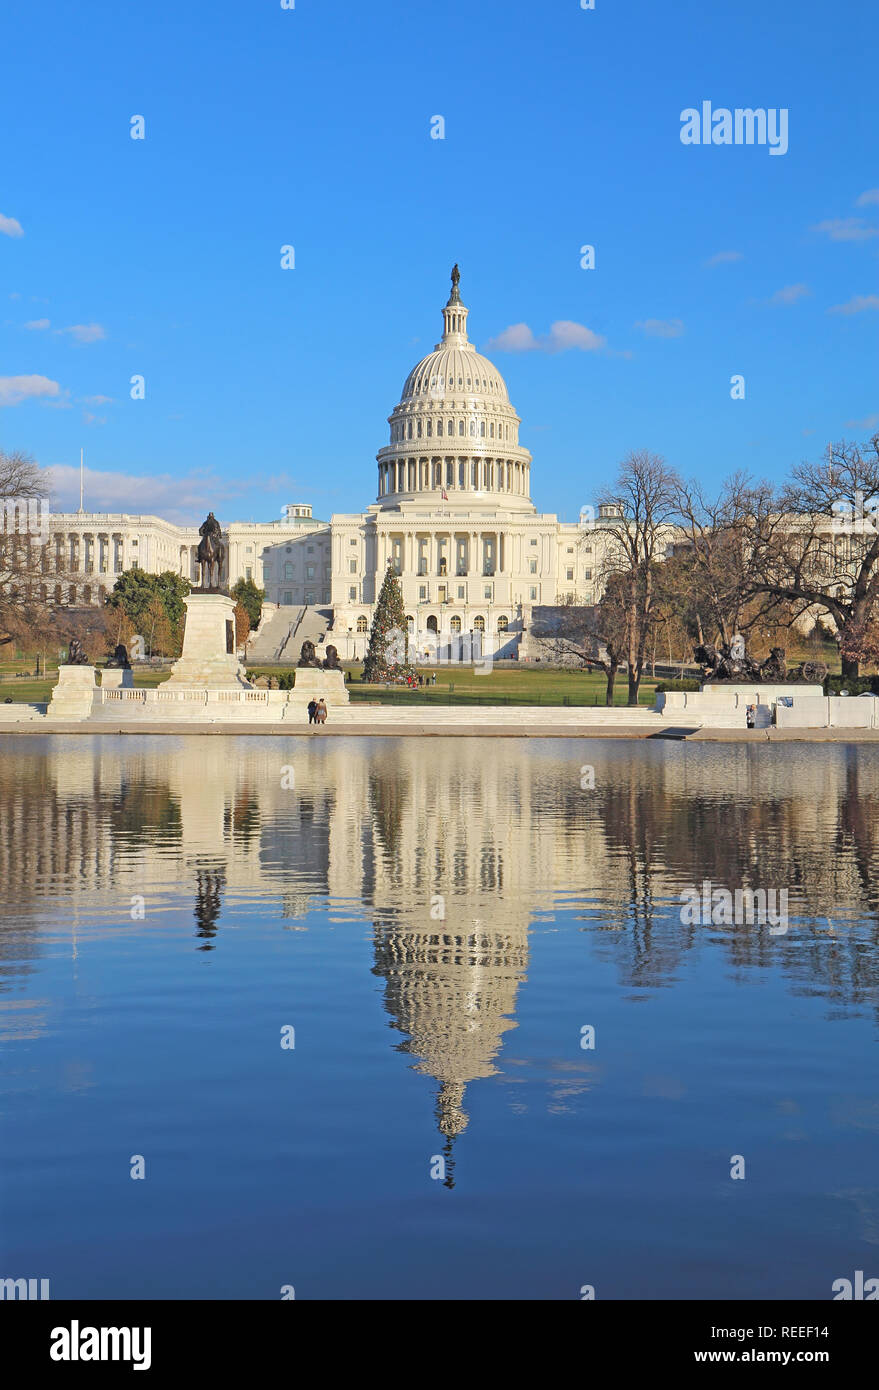 The west side of the United States Capitol building and Ulysses S Grant memorial in Washington, DC reflected in the reflecting pool with Christmas tre Stock Photo